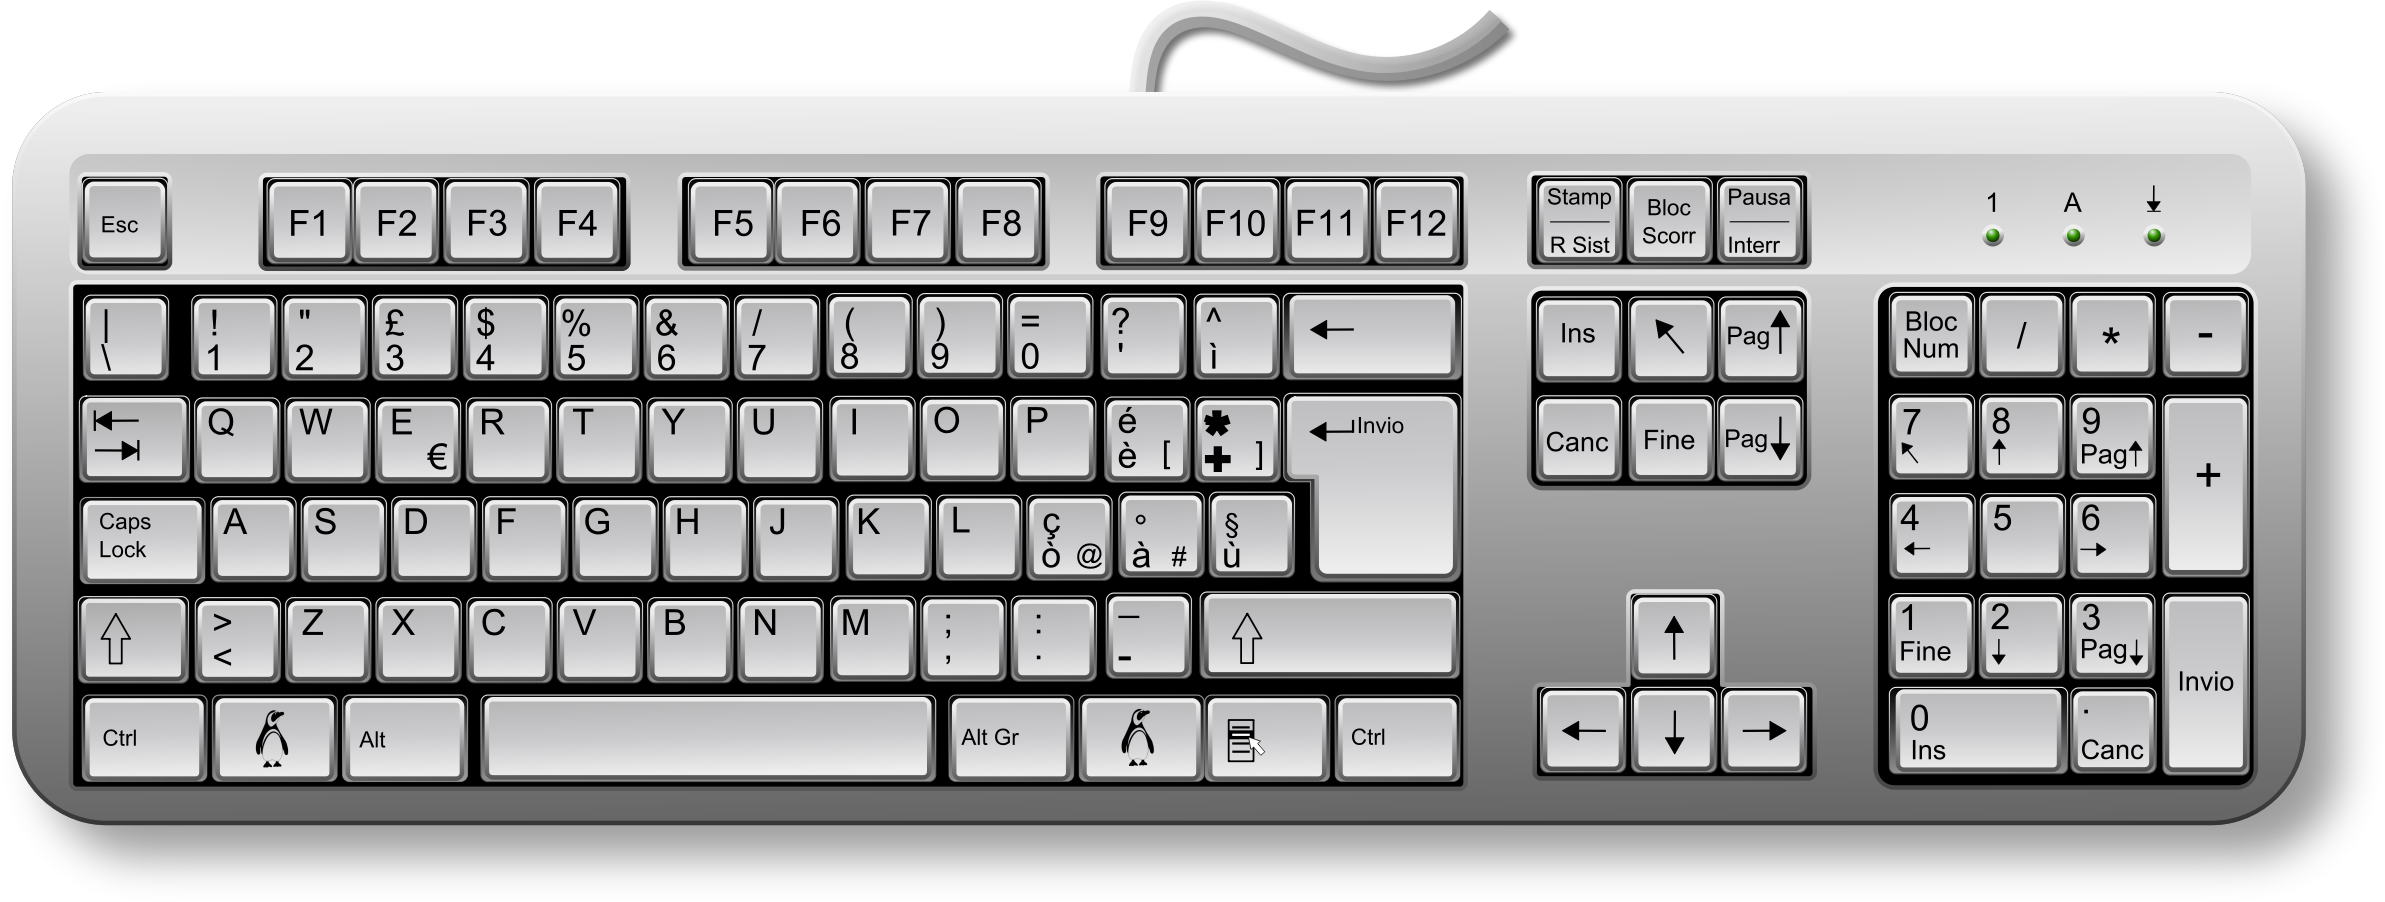 clipart of keyboard - photo #40